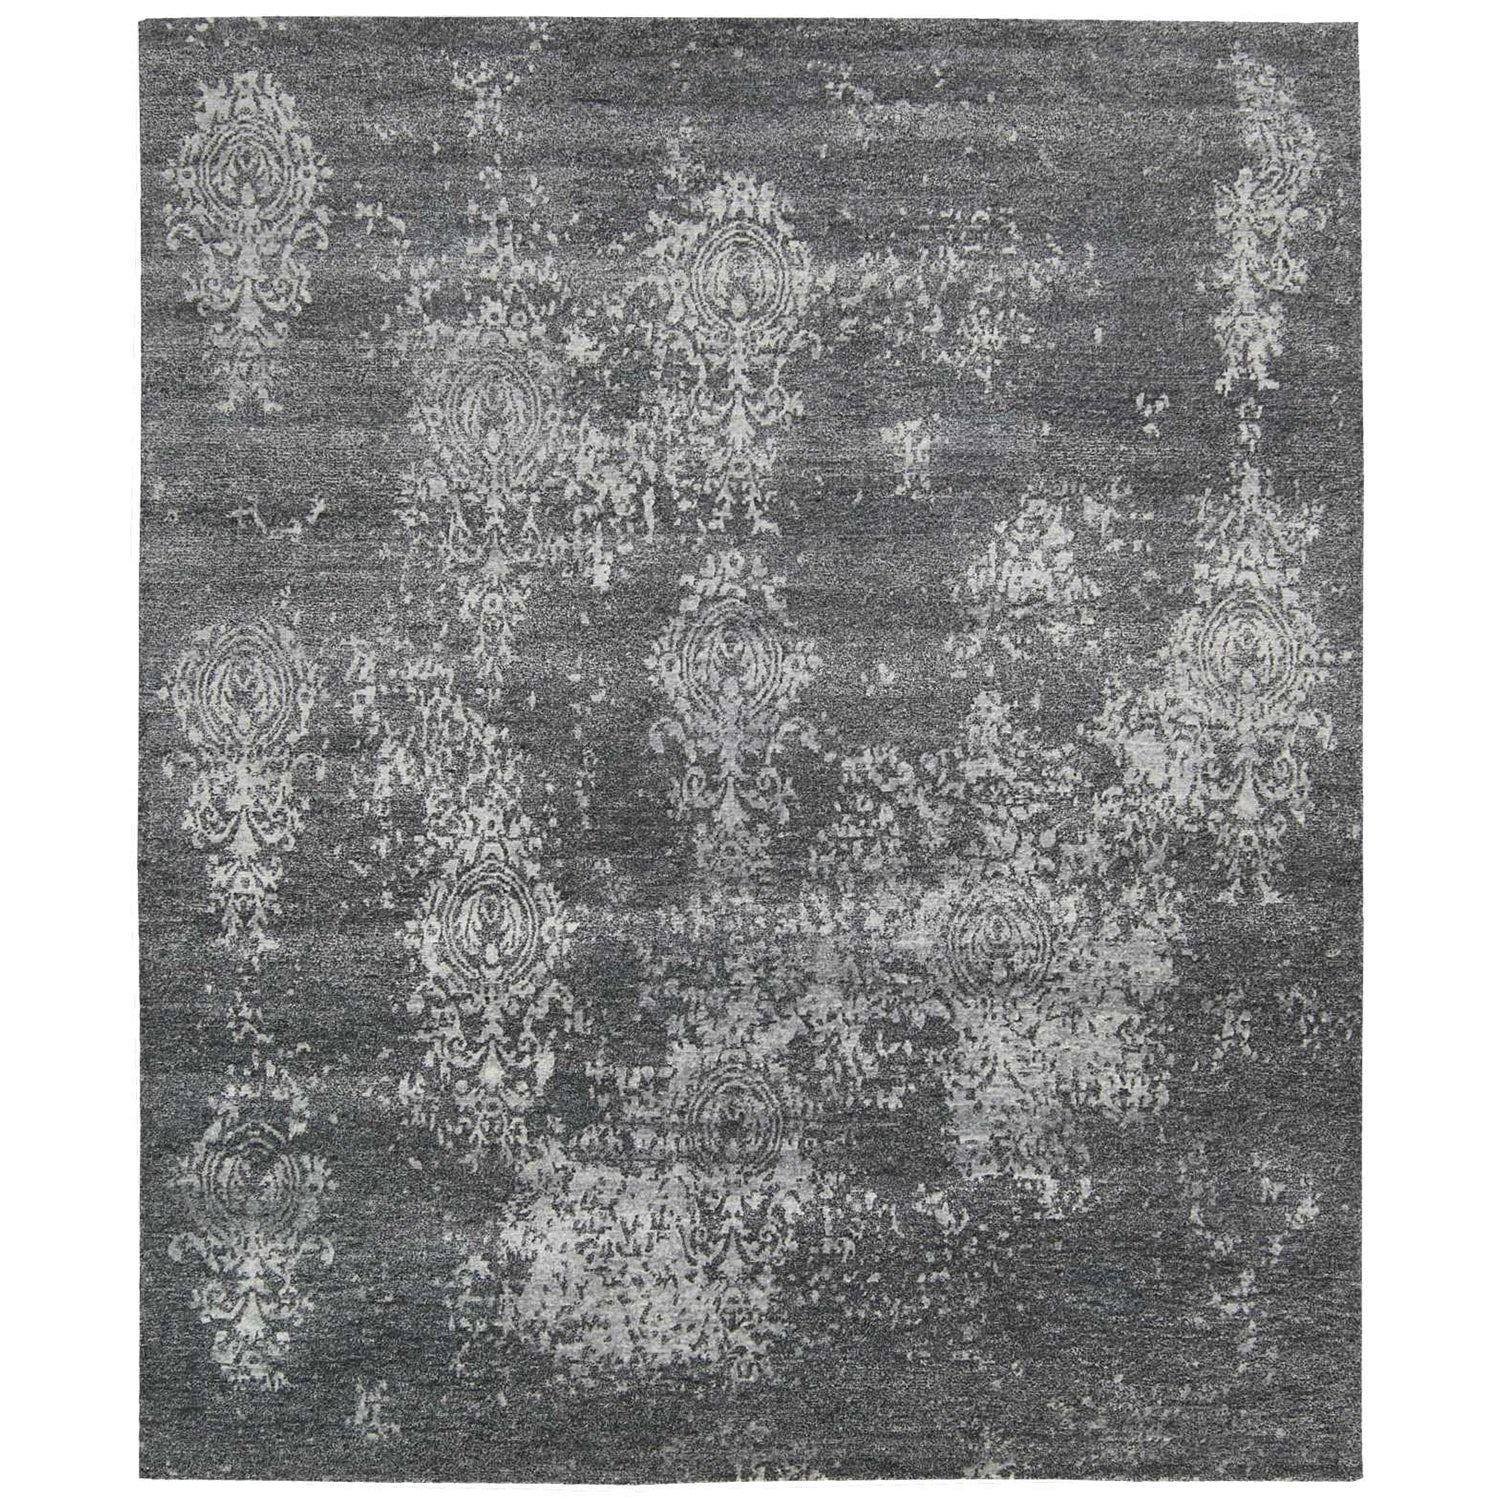 Monochromatic gray rug with distressed vintage floral motifs and gradient background.